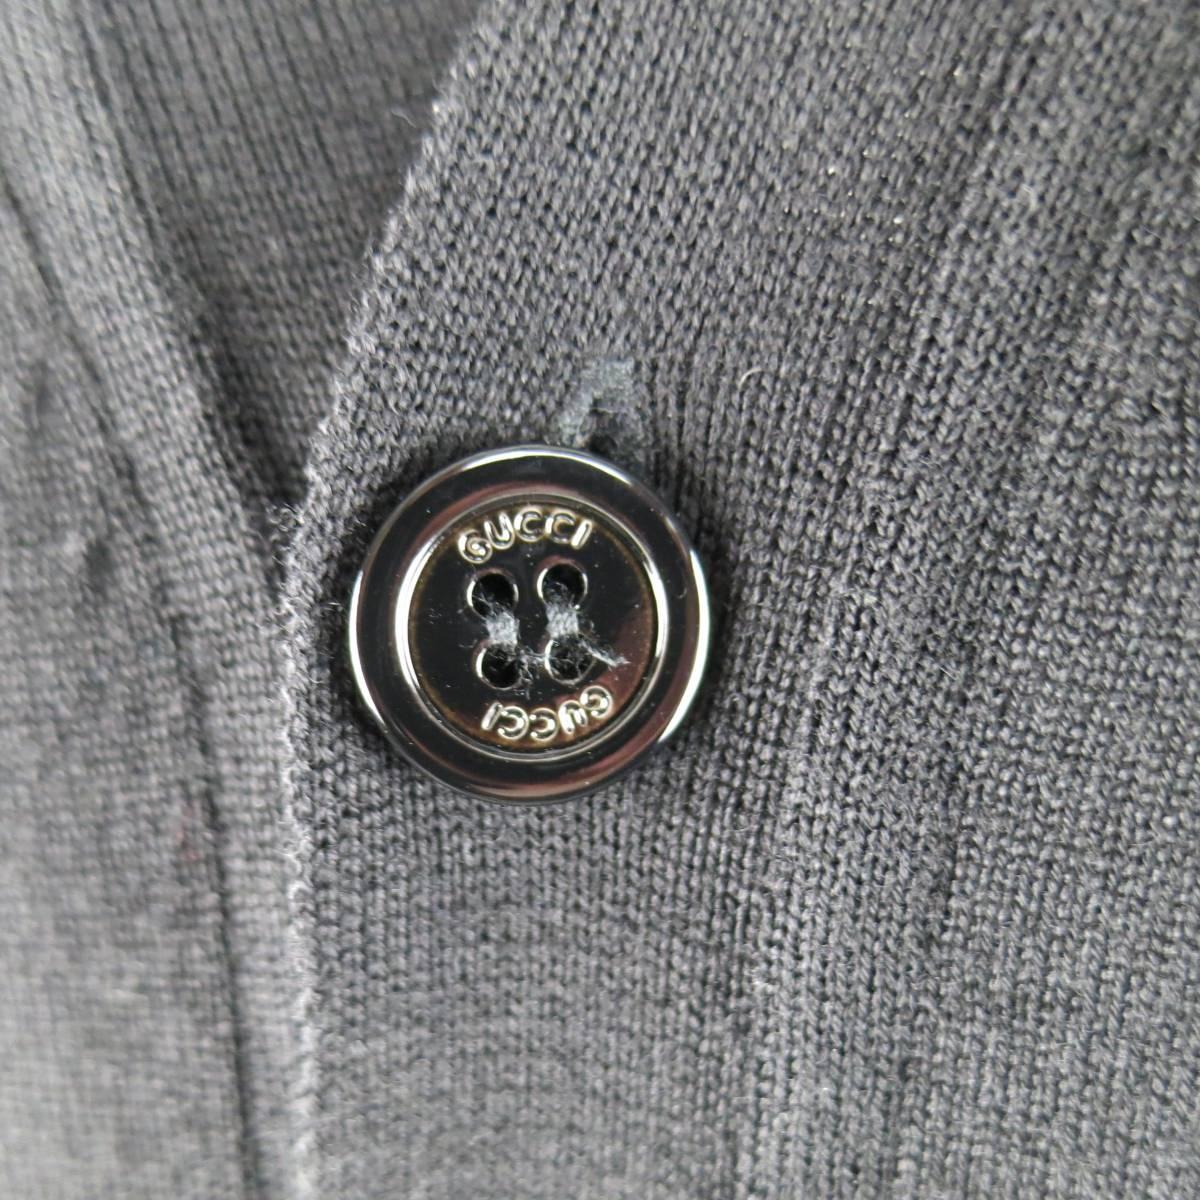 Basic GUCCI button up V neck cardigan in a light weight black wool knit with raglan sleeve detail and ribbed cuffs and hem. Made in Italy.
 
Good Pre-Owned Condition
Marked Size: L
 
Measurements
 
Shoulders: 18 in.
Sleeve: 25 in.
Chest: 40